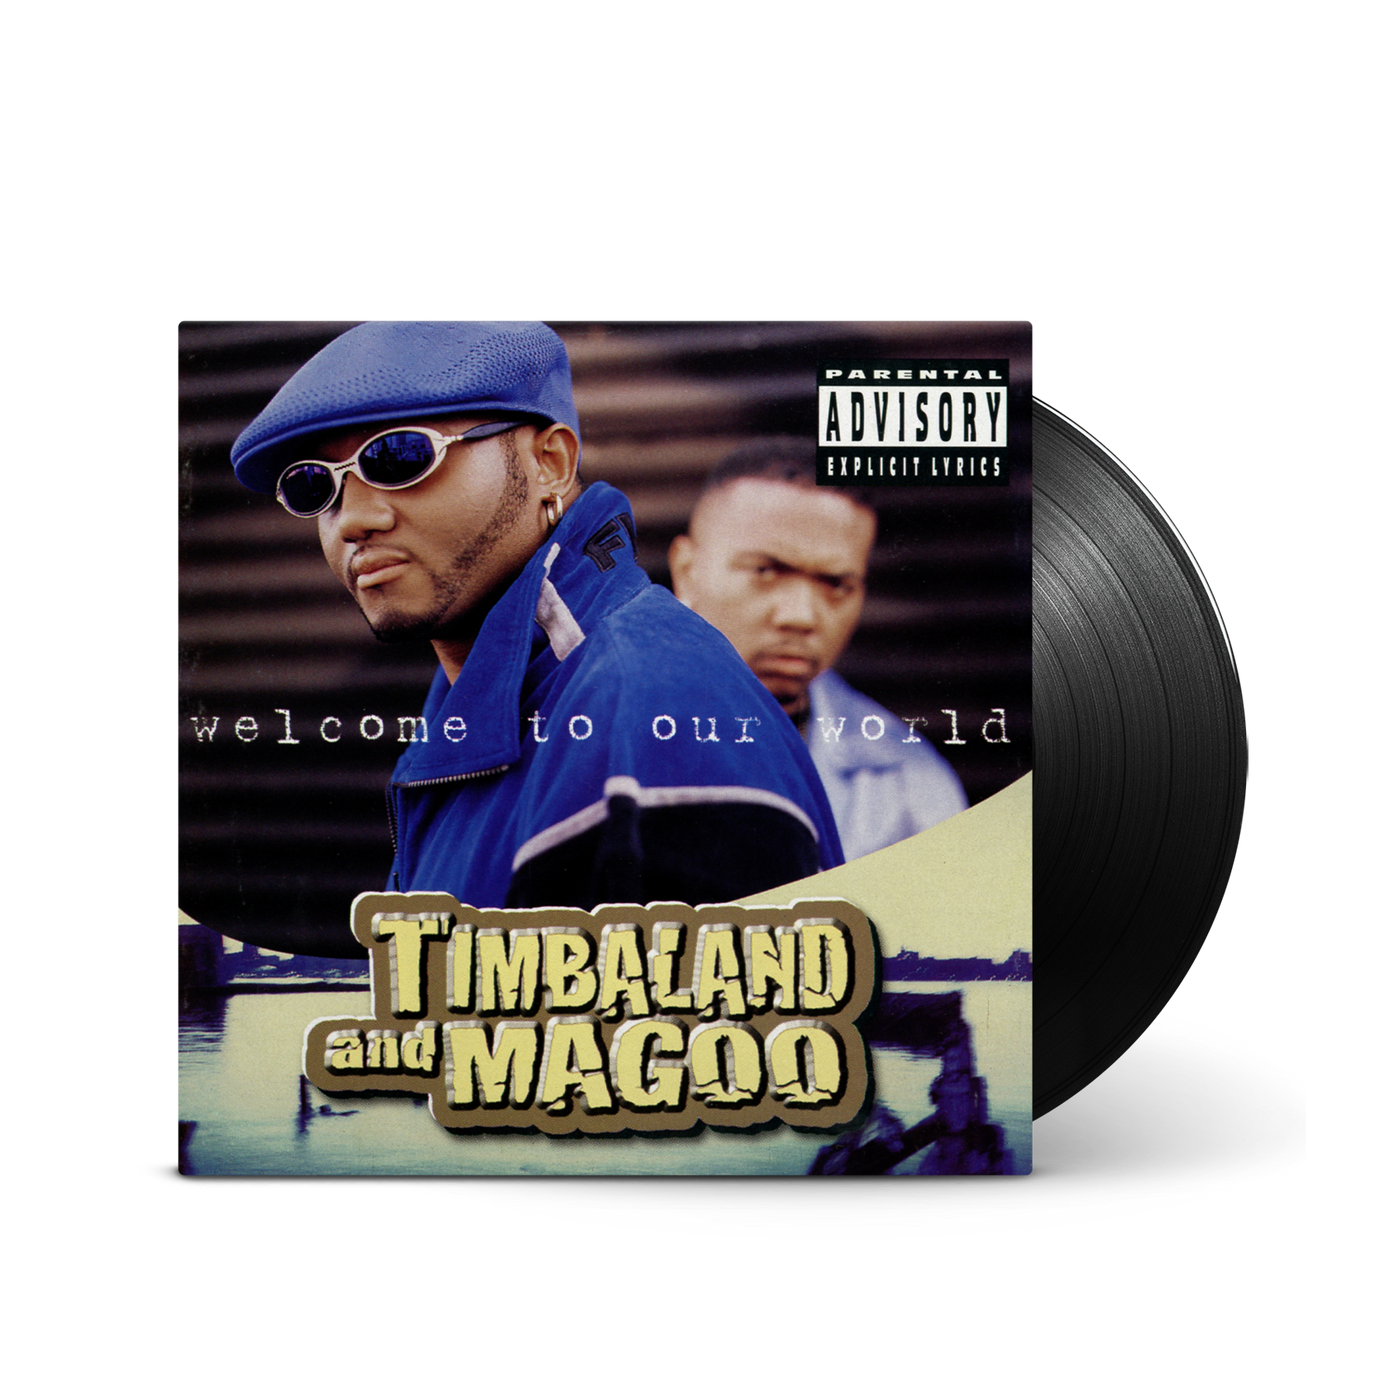 Timbaland & Magoo - Welcome To Our World Vinyl